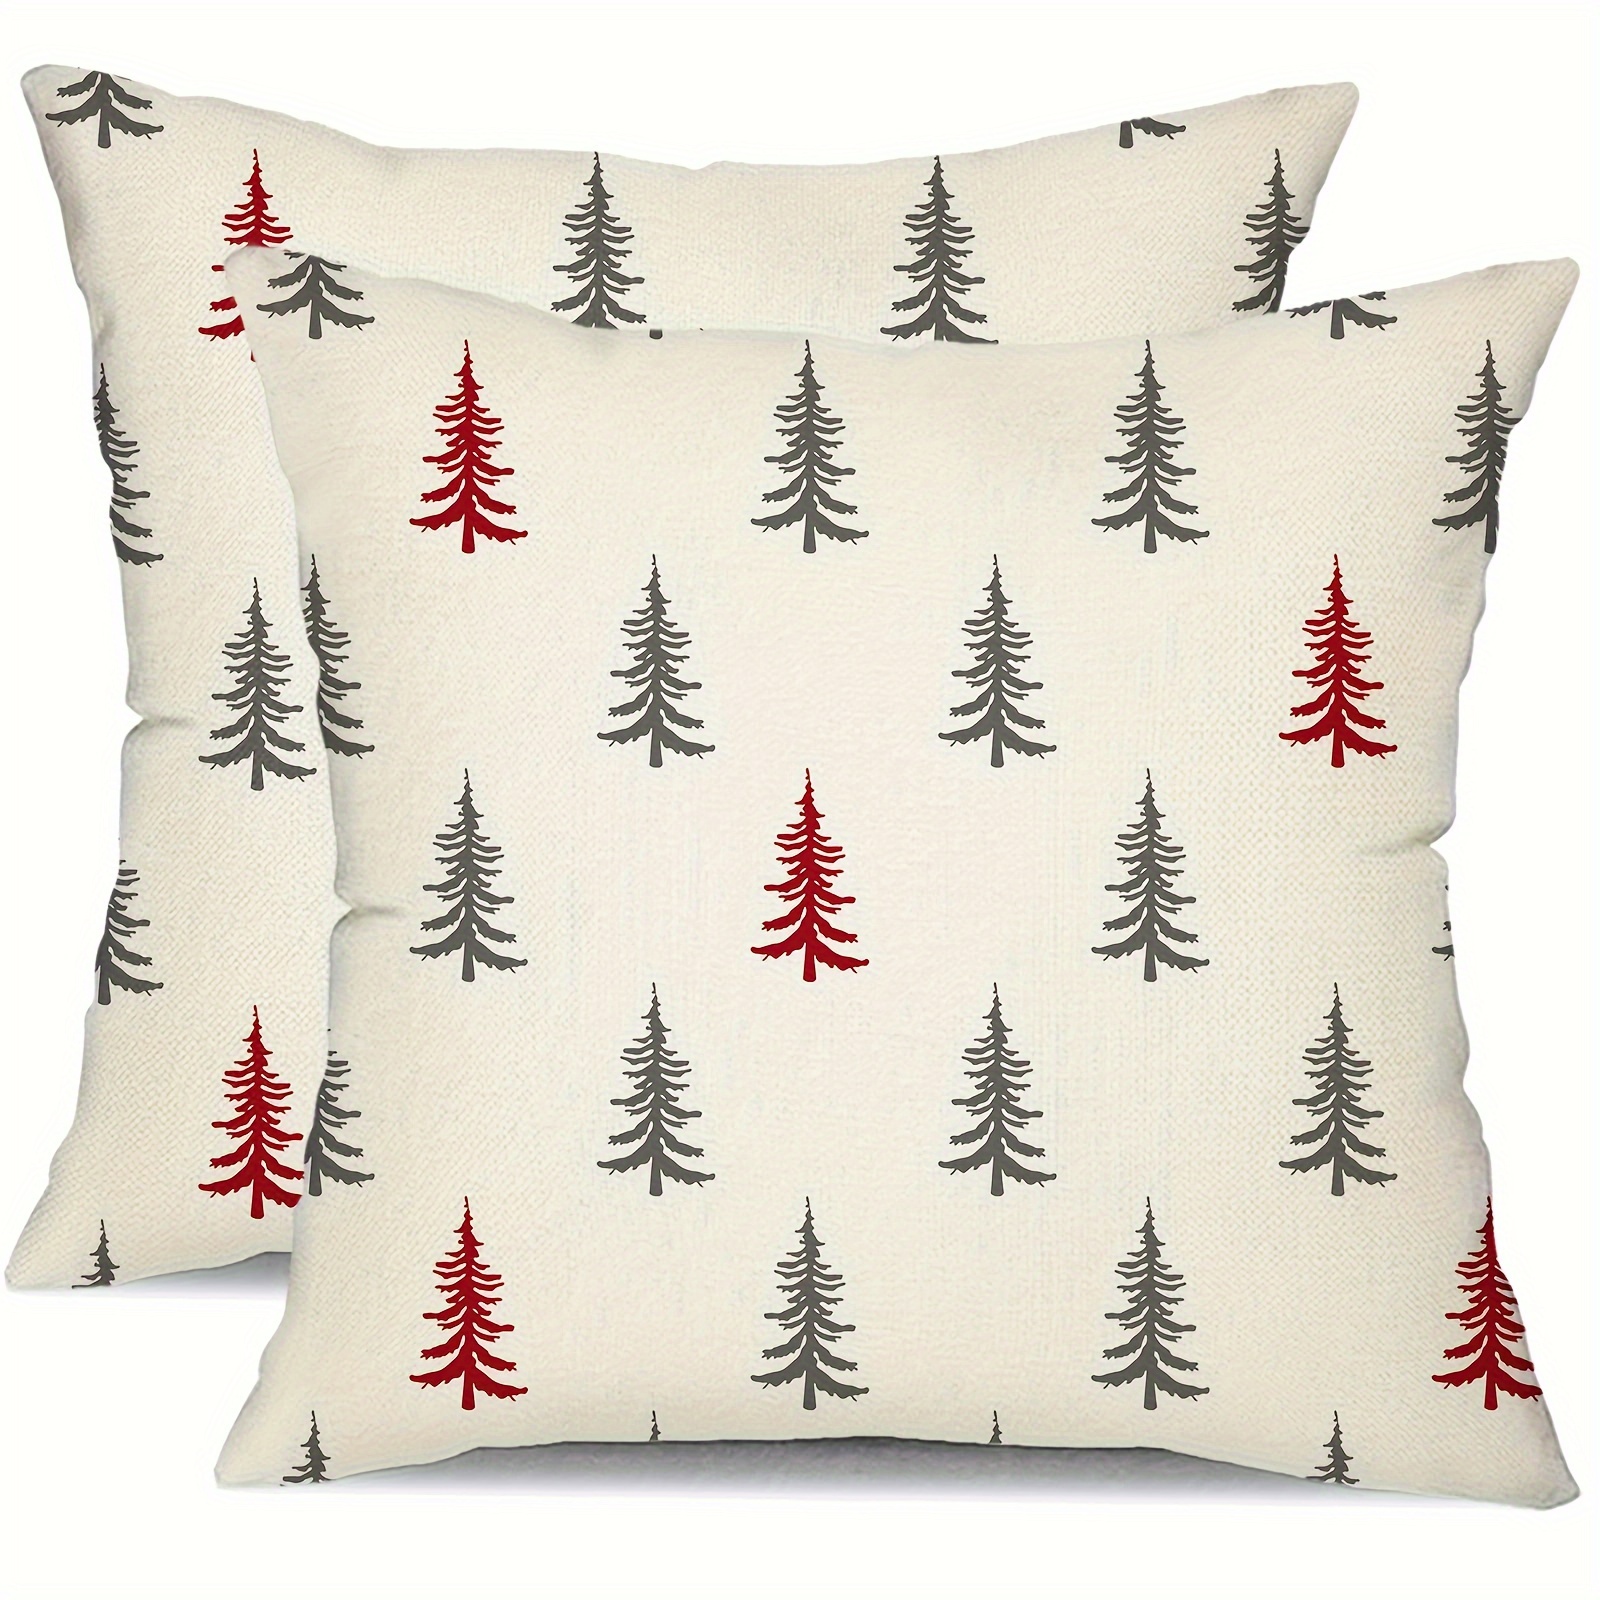 

2pcs Linen Mixed Weave Christmas Christmas Tree Throw Pillow Cover Home Accessories Living Room Sofa Bedroom Zipper Pillow Case Without Pillow Core